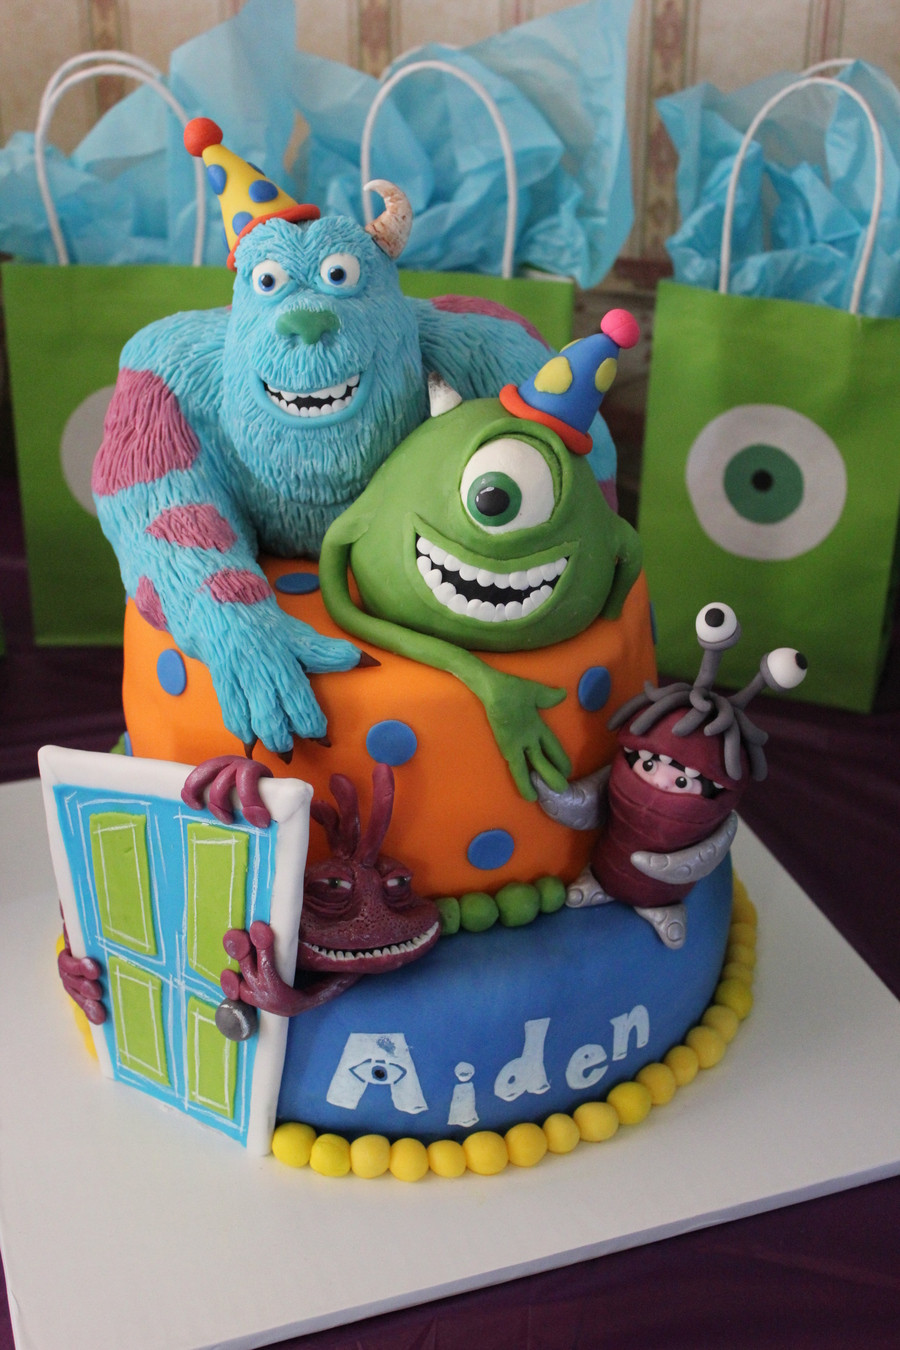 Monsters Inc Birthday Cake
 I Love Monsters Inc And So Does My Nephew I Sculpted